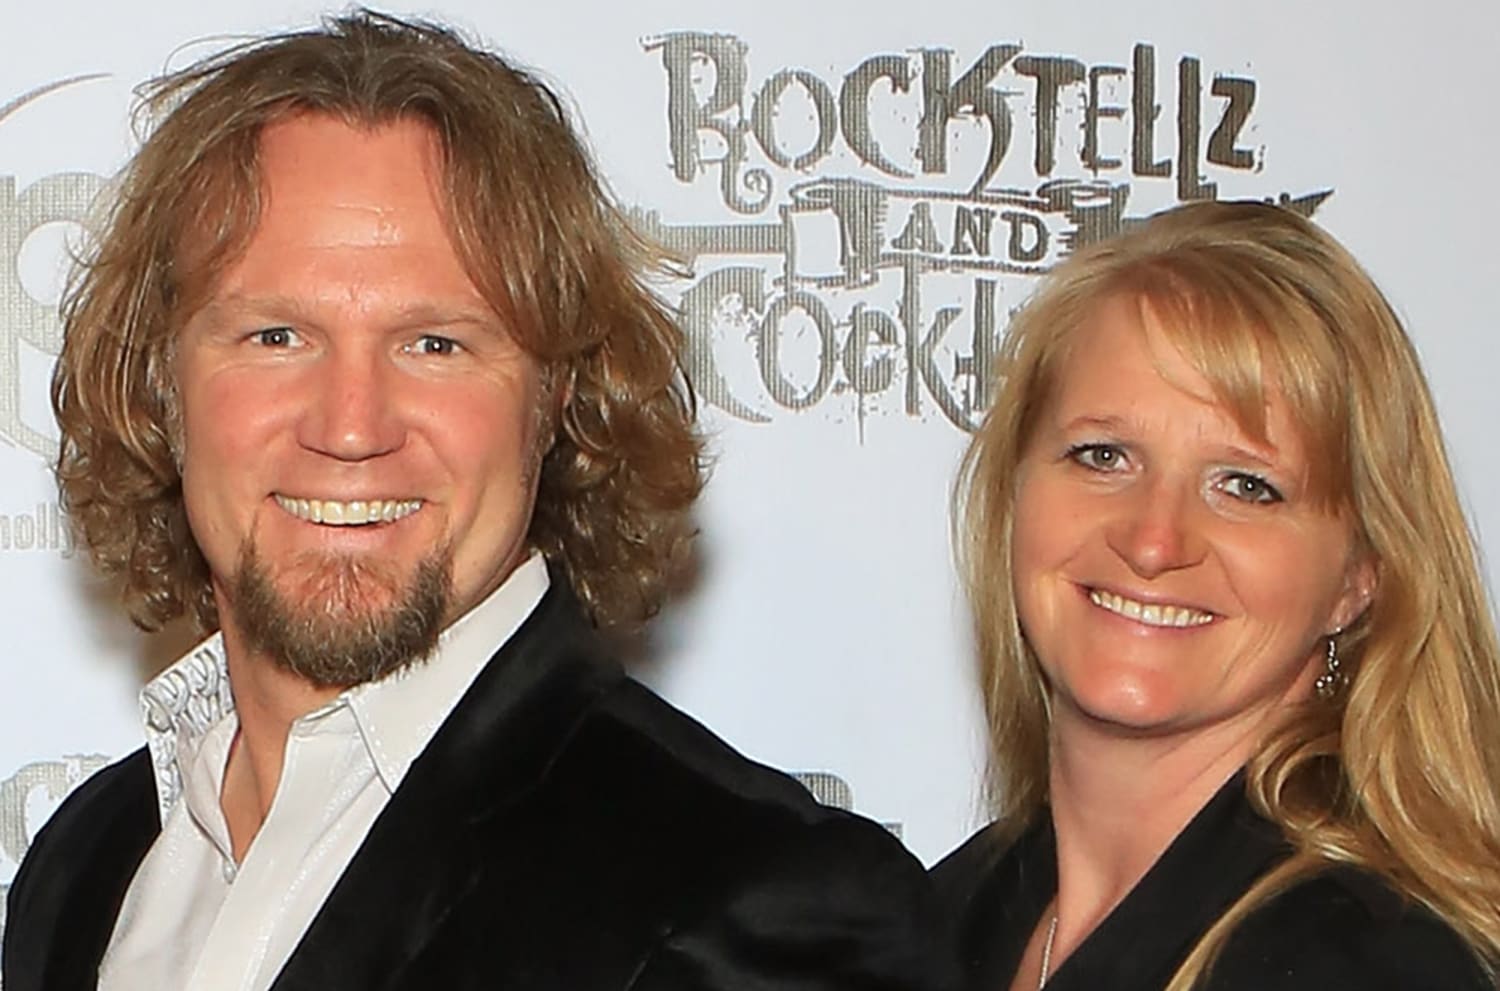 Why Did Kody Brown And Christine Brown Break Up In Sister Wives? pic